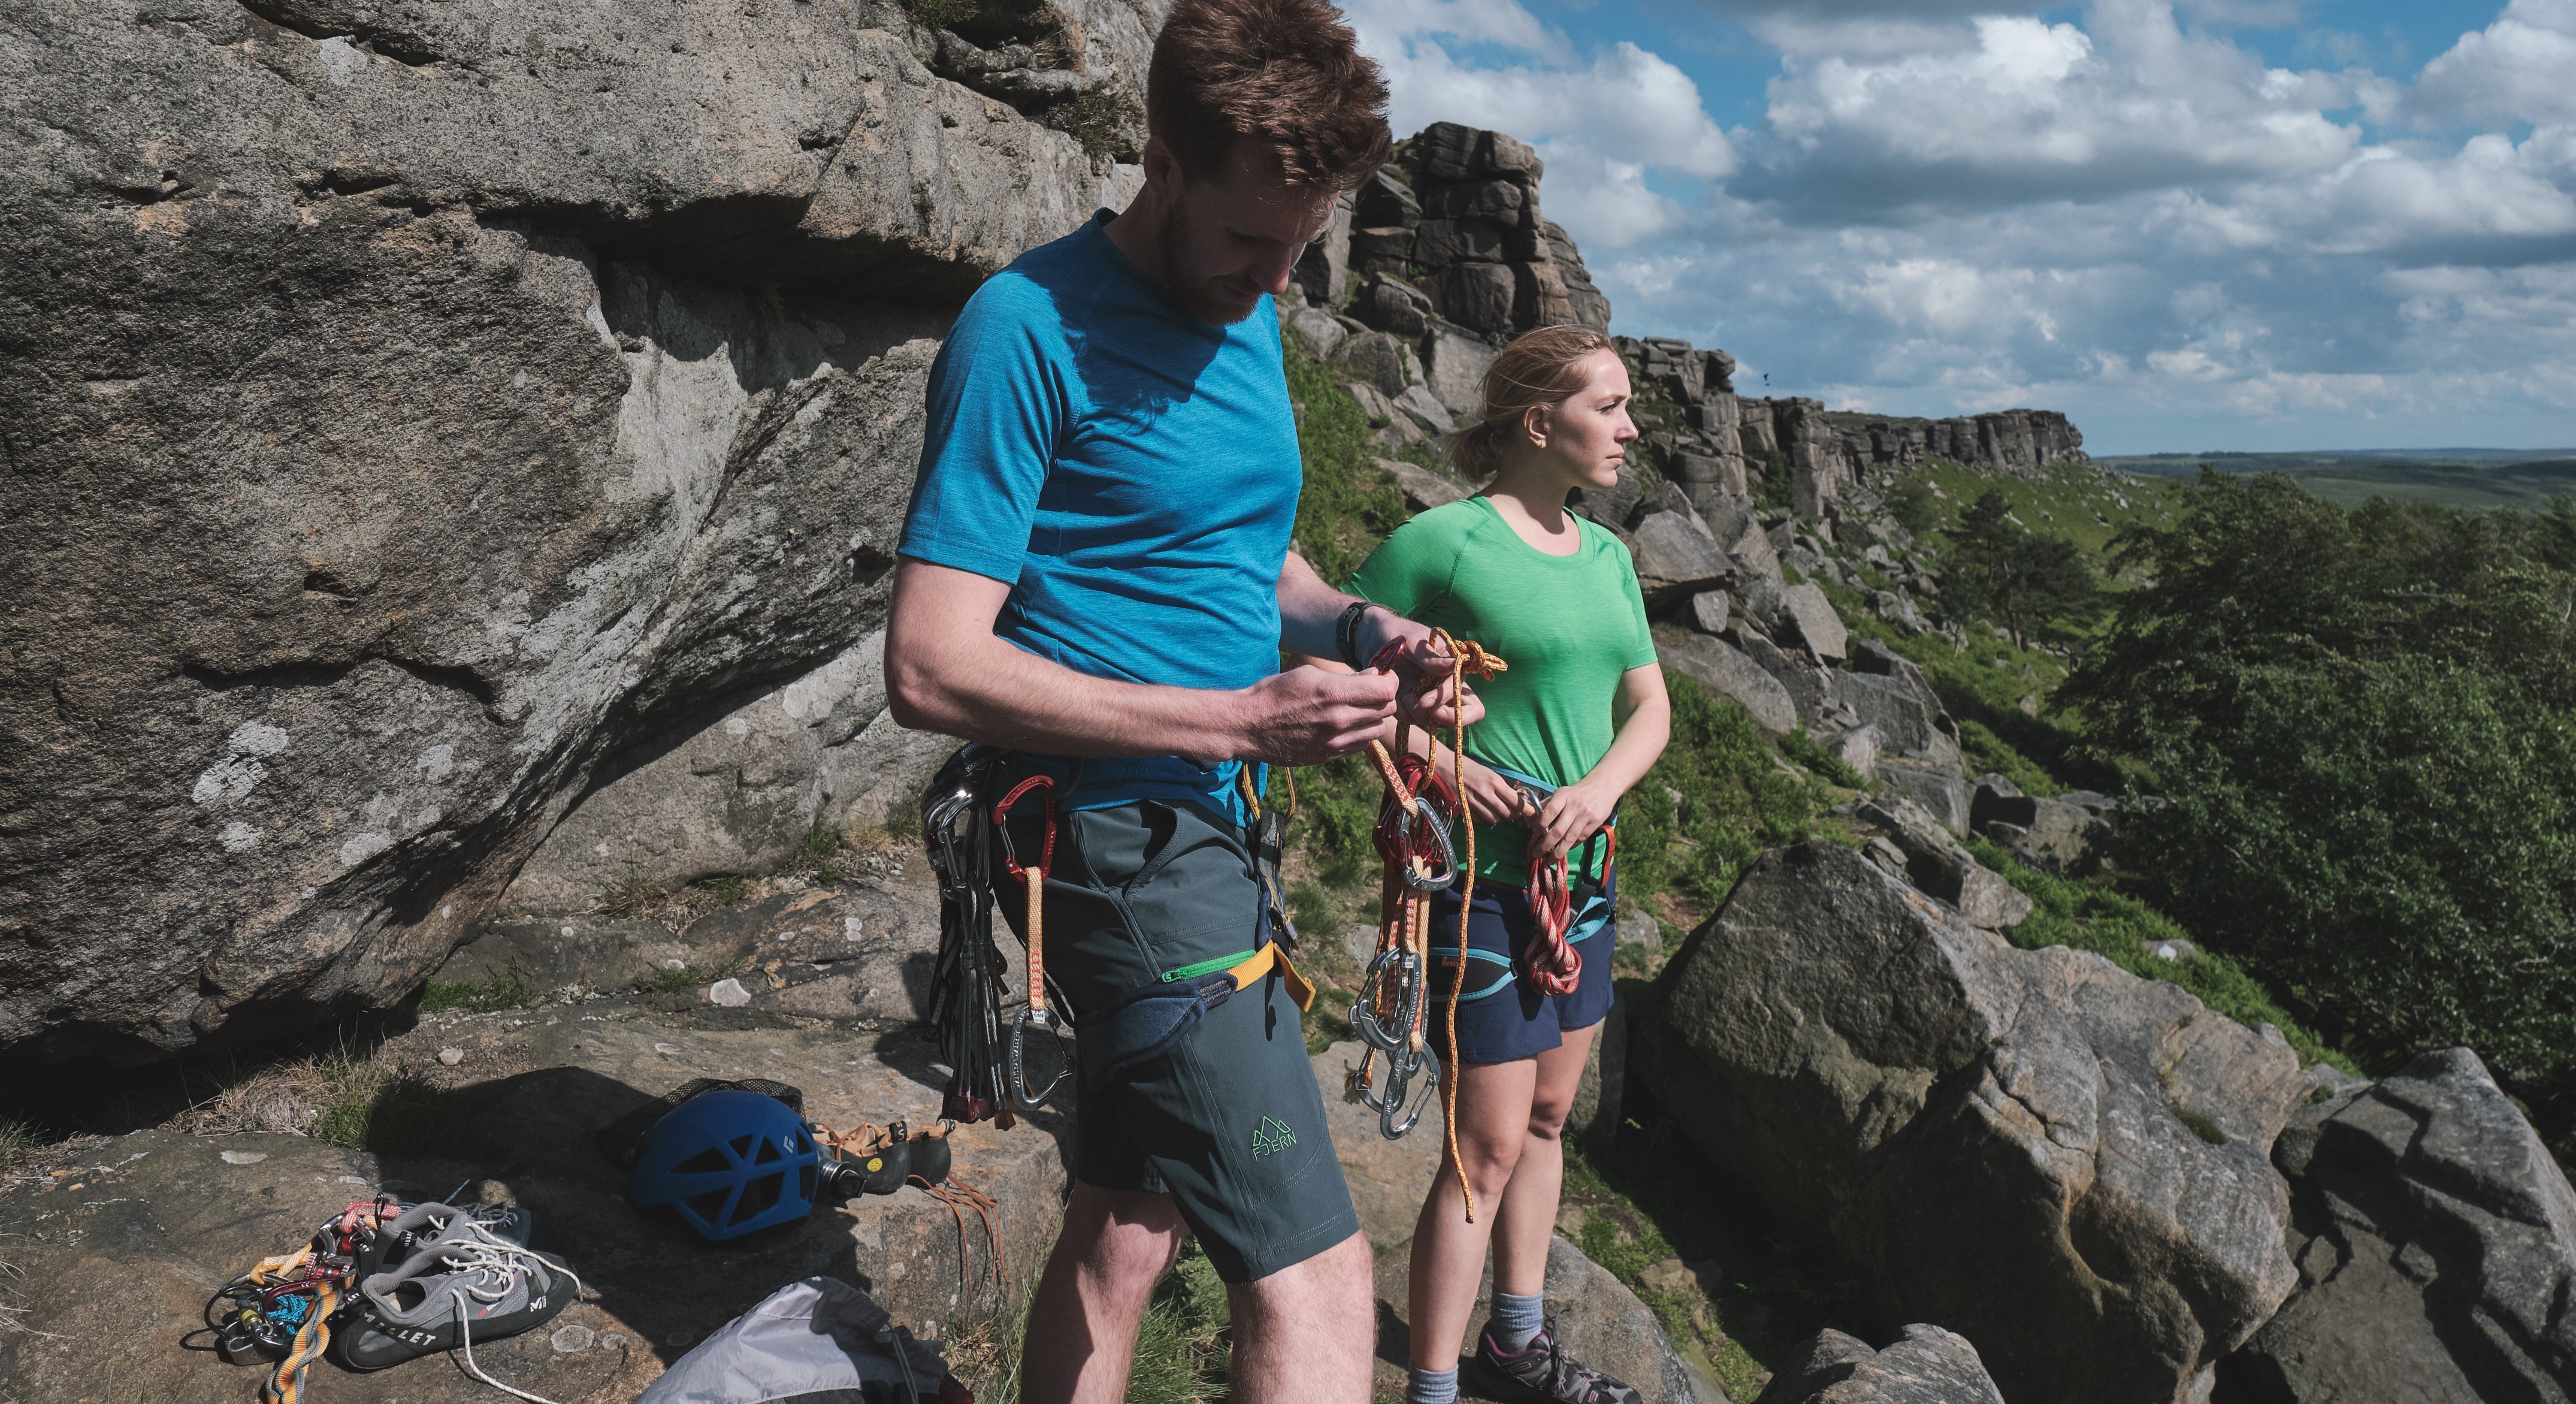 Klatring Shorts and Andas Crews being worn with harnesses in preparation for a rock climb